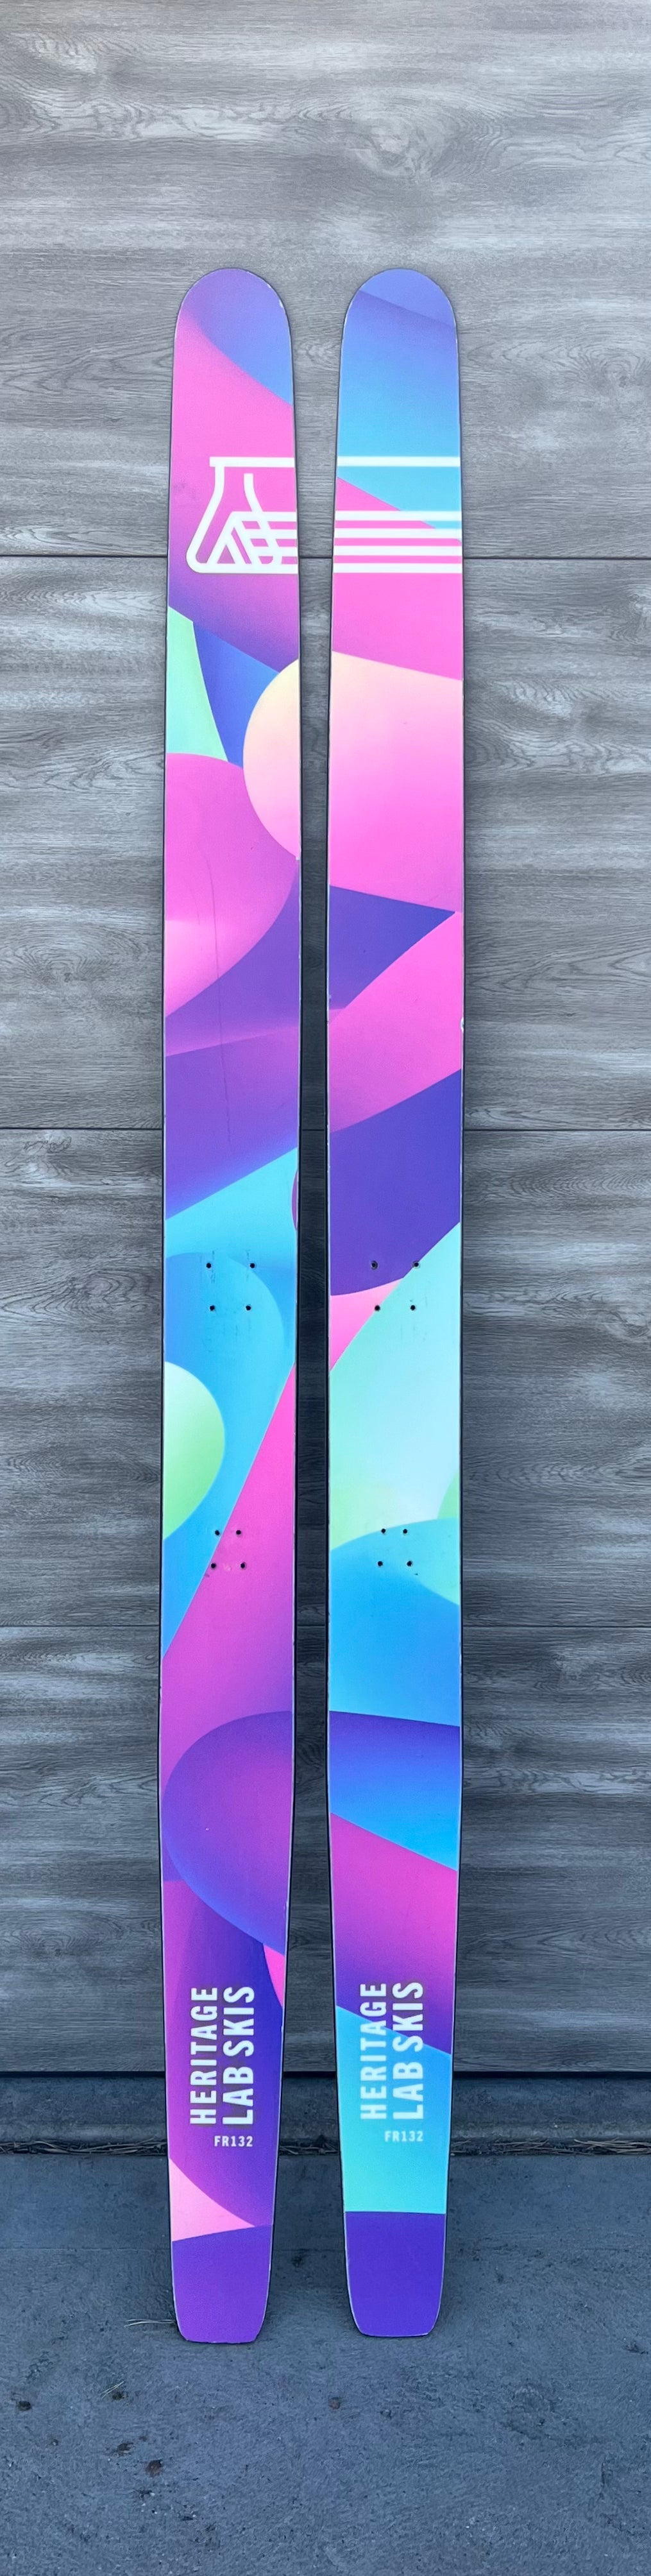 Outlet Skis